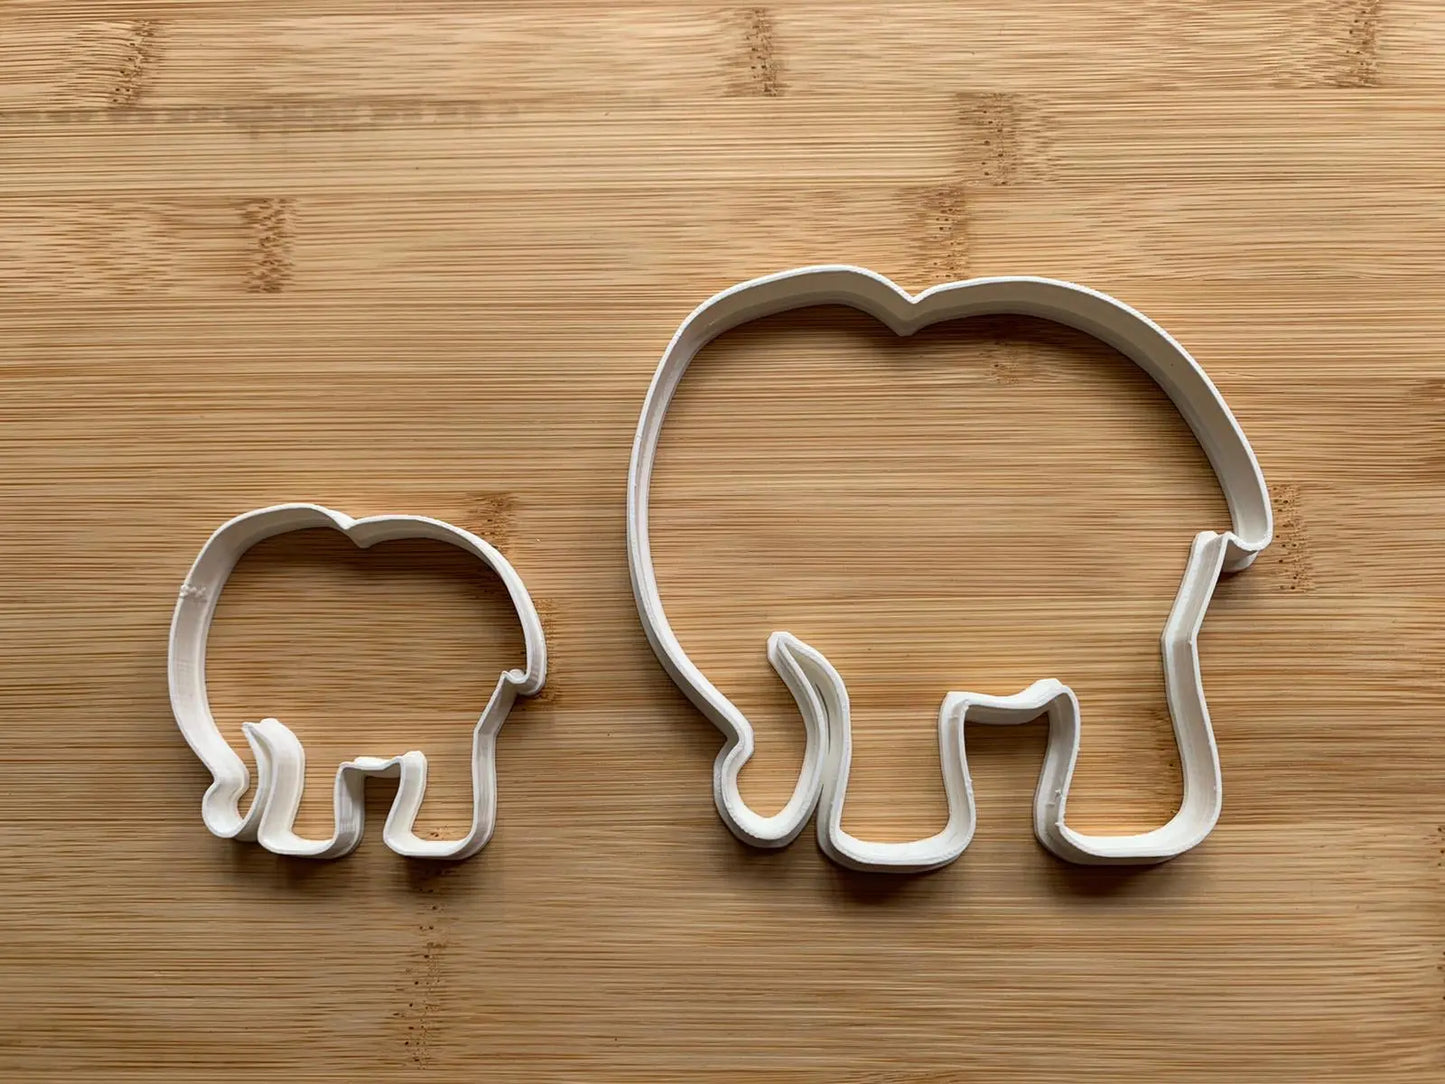 Elephant animal Cookie cutter (1) MEG cookie cutters